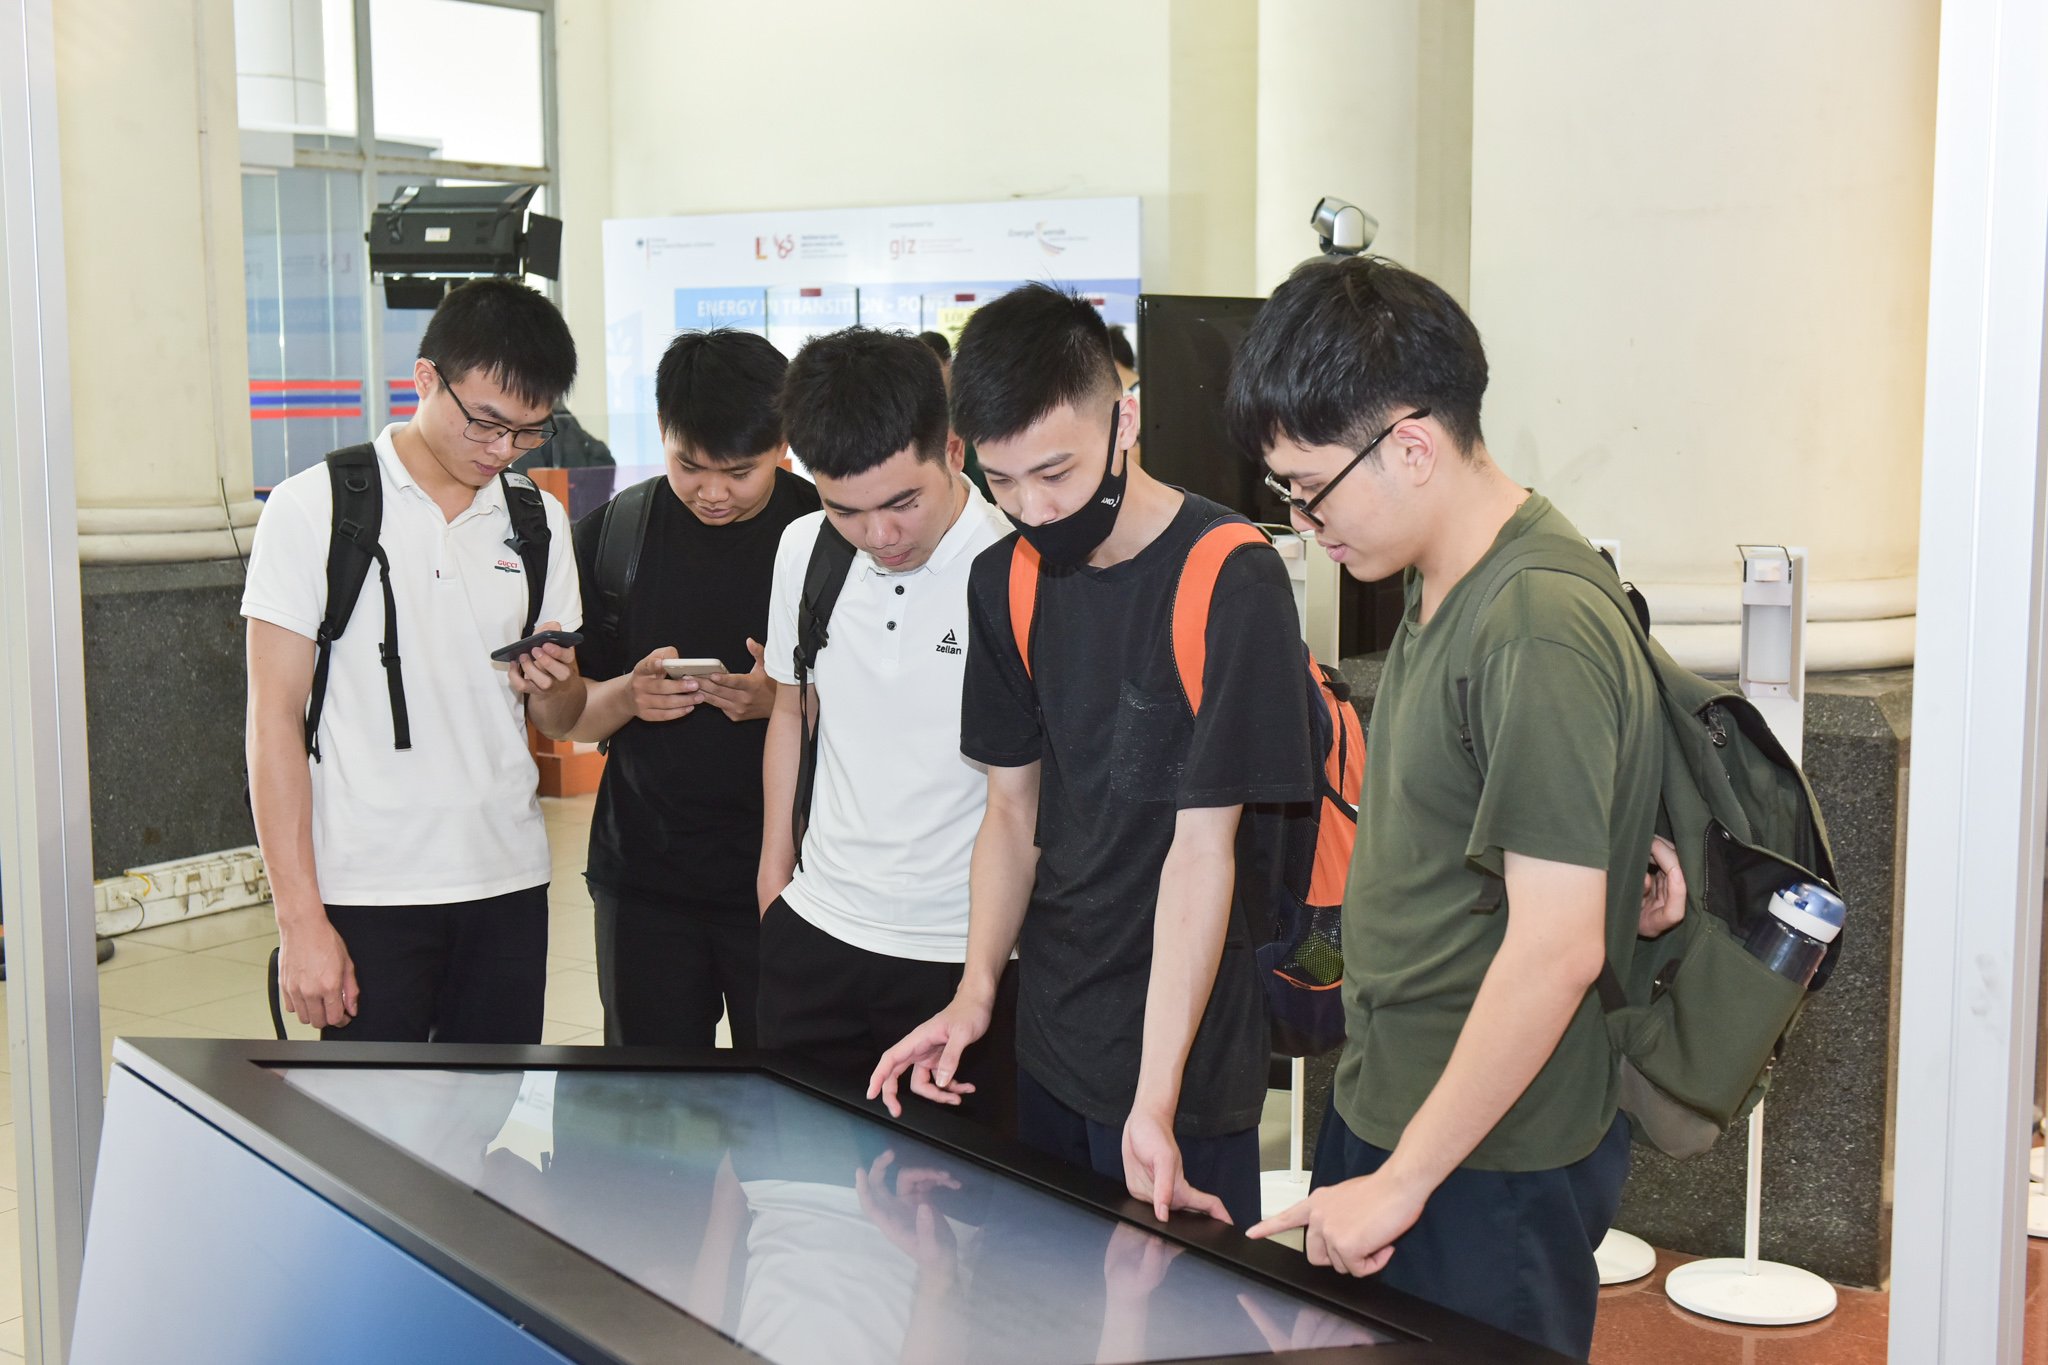 At Hanoi University of Science and Technology (HUST), five male students inform themselves about new mobility concepts at the station "mobility". They are leaning over a waist-high touch screen. April 2021.